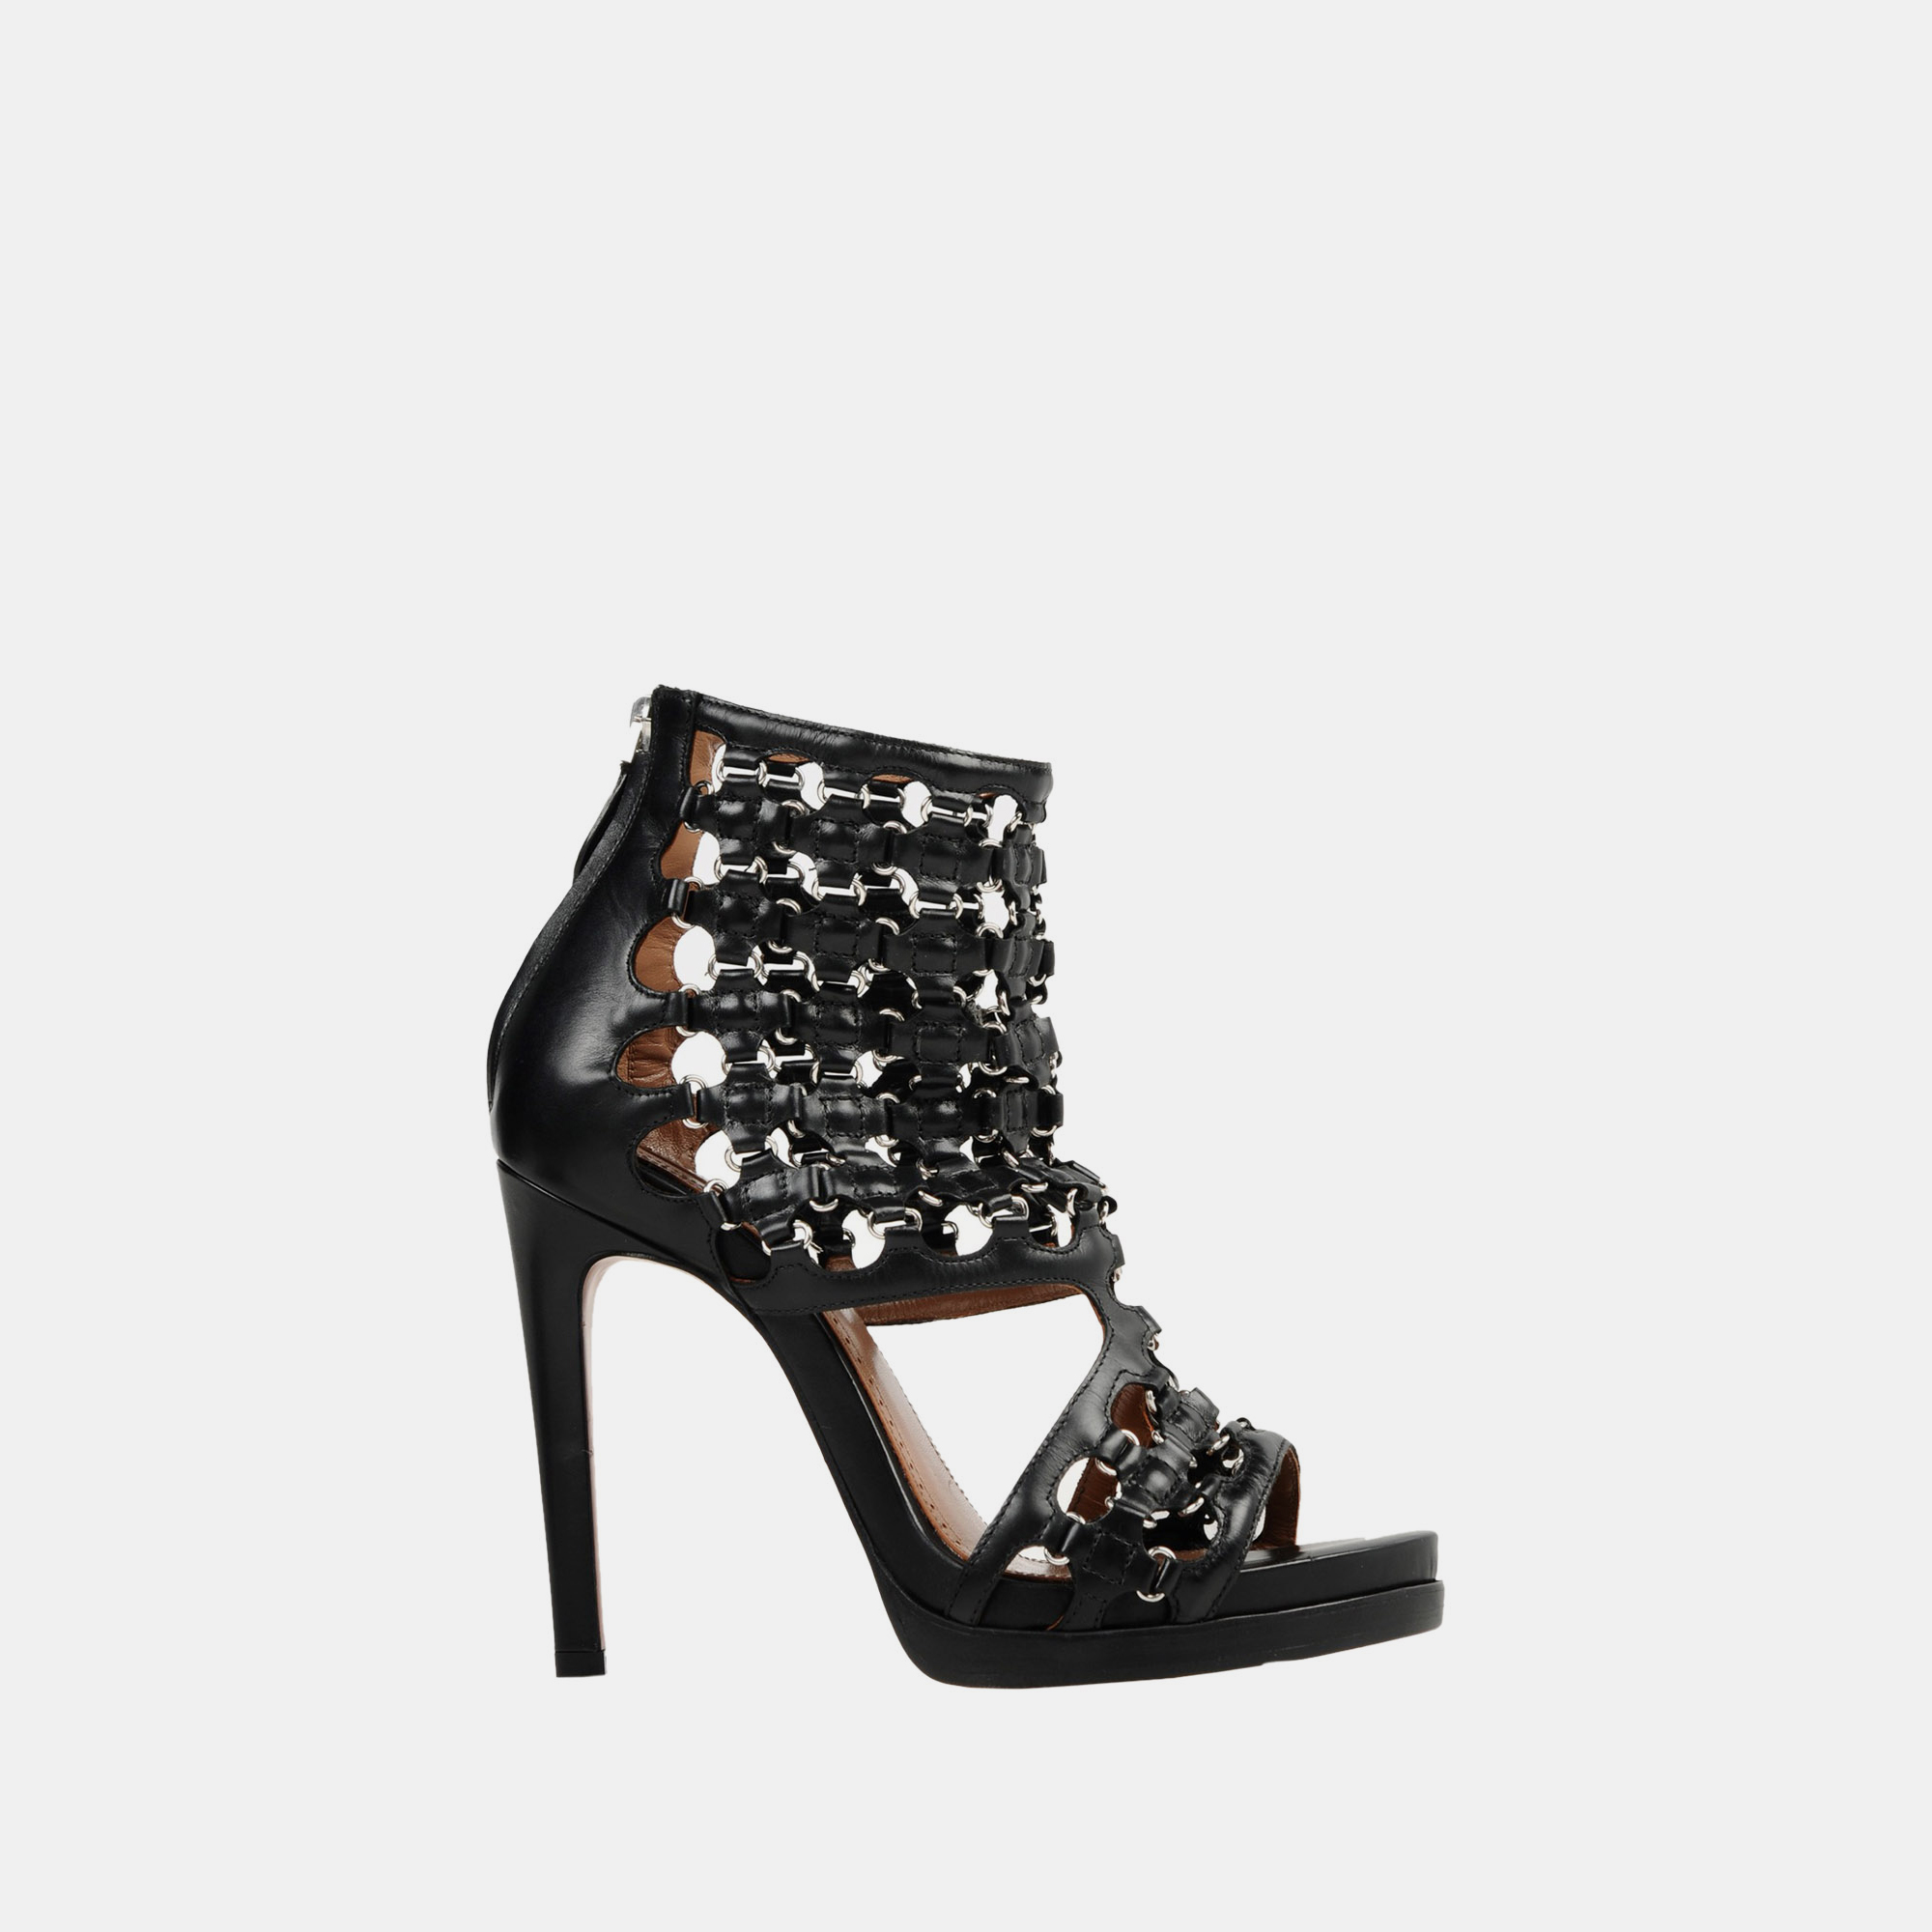 Alaia black leather caged sandals 40